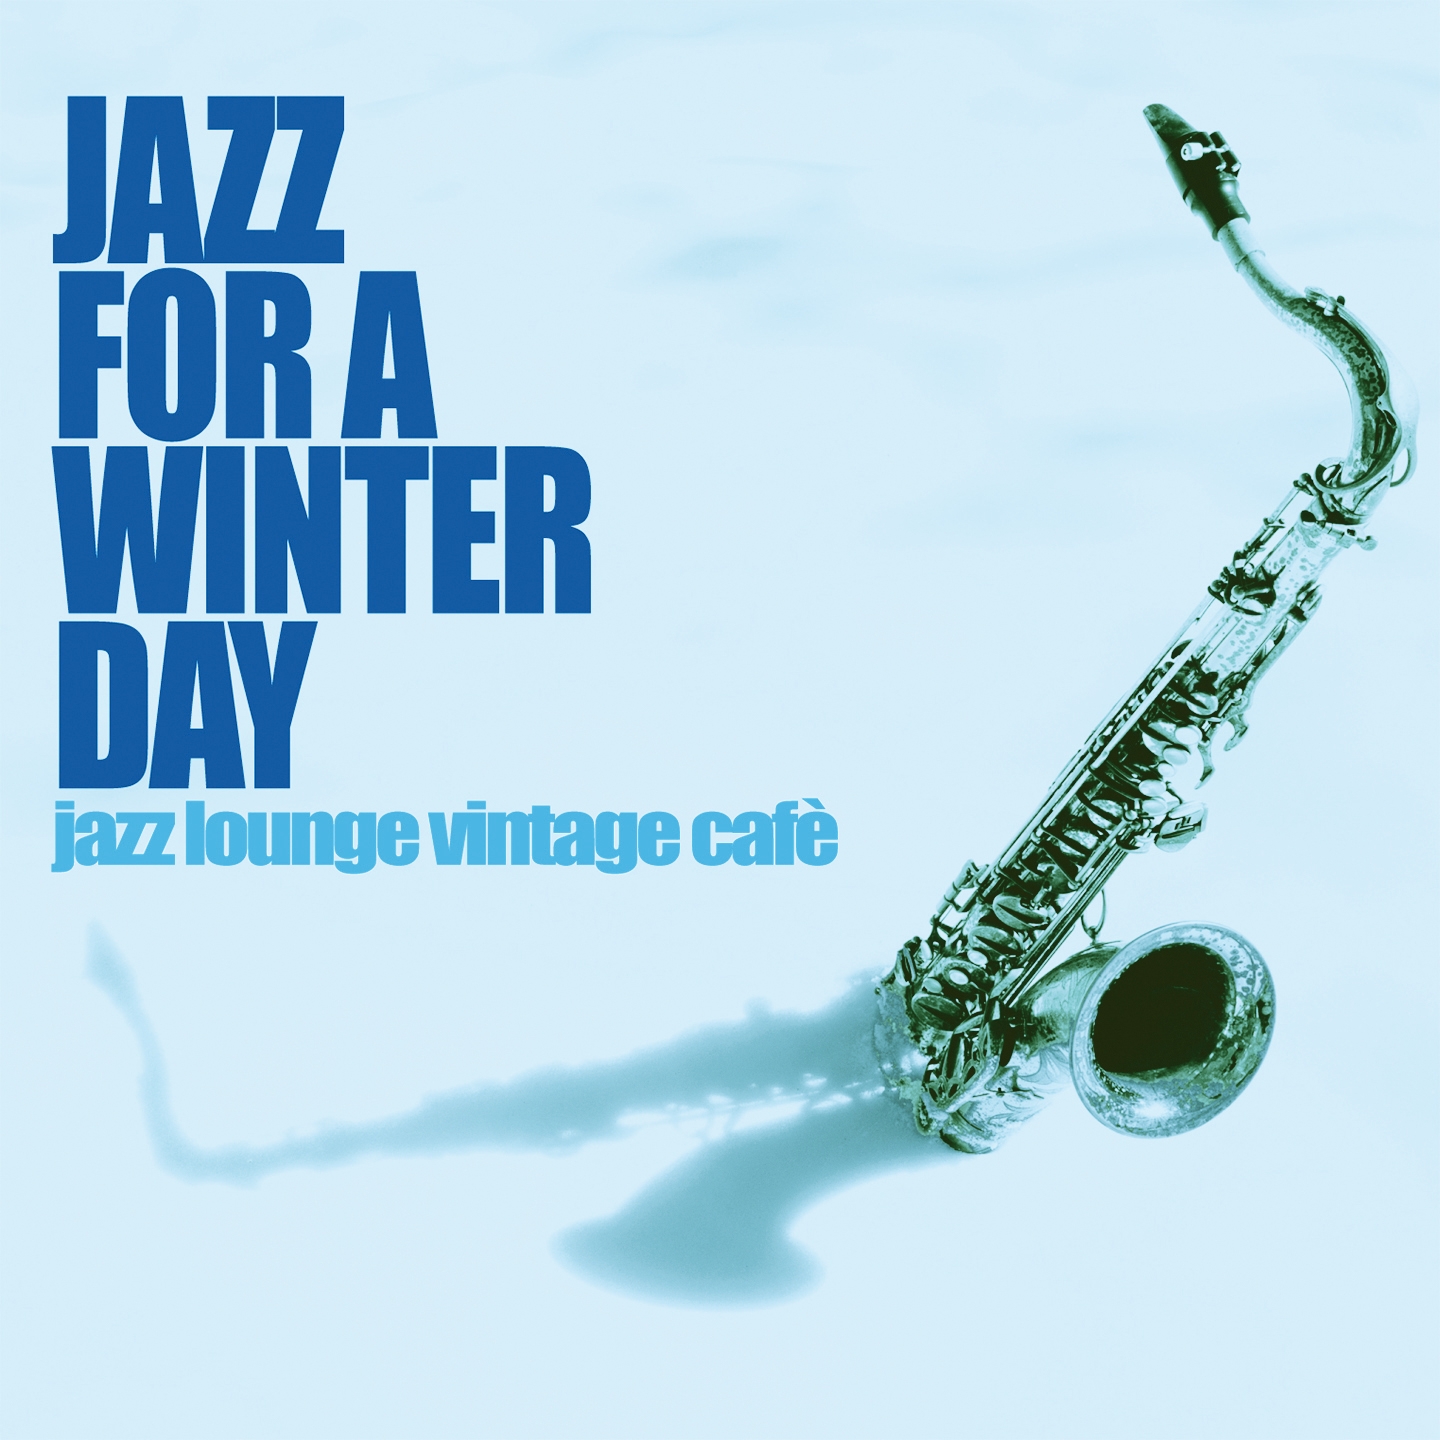 Jazz for a Winter Day Jazz Lounge Vintage Cafe